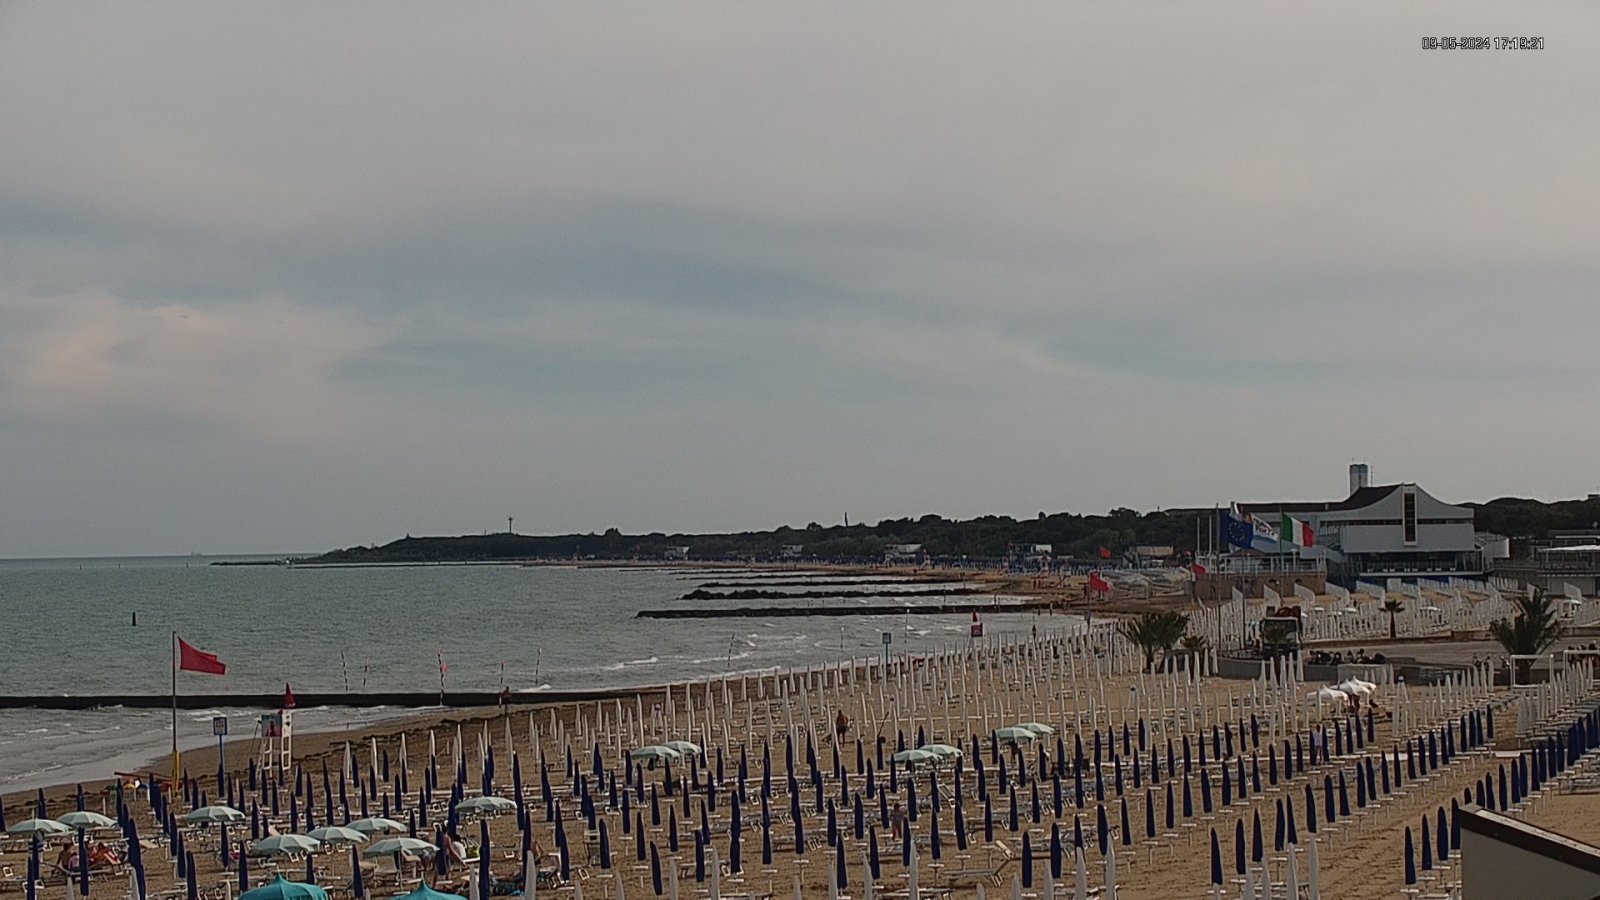 Webcam image with a zoom view of the beach and Piazza Marcello d'Olivo